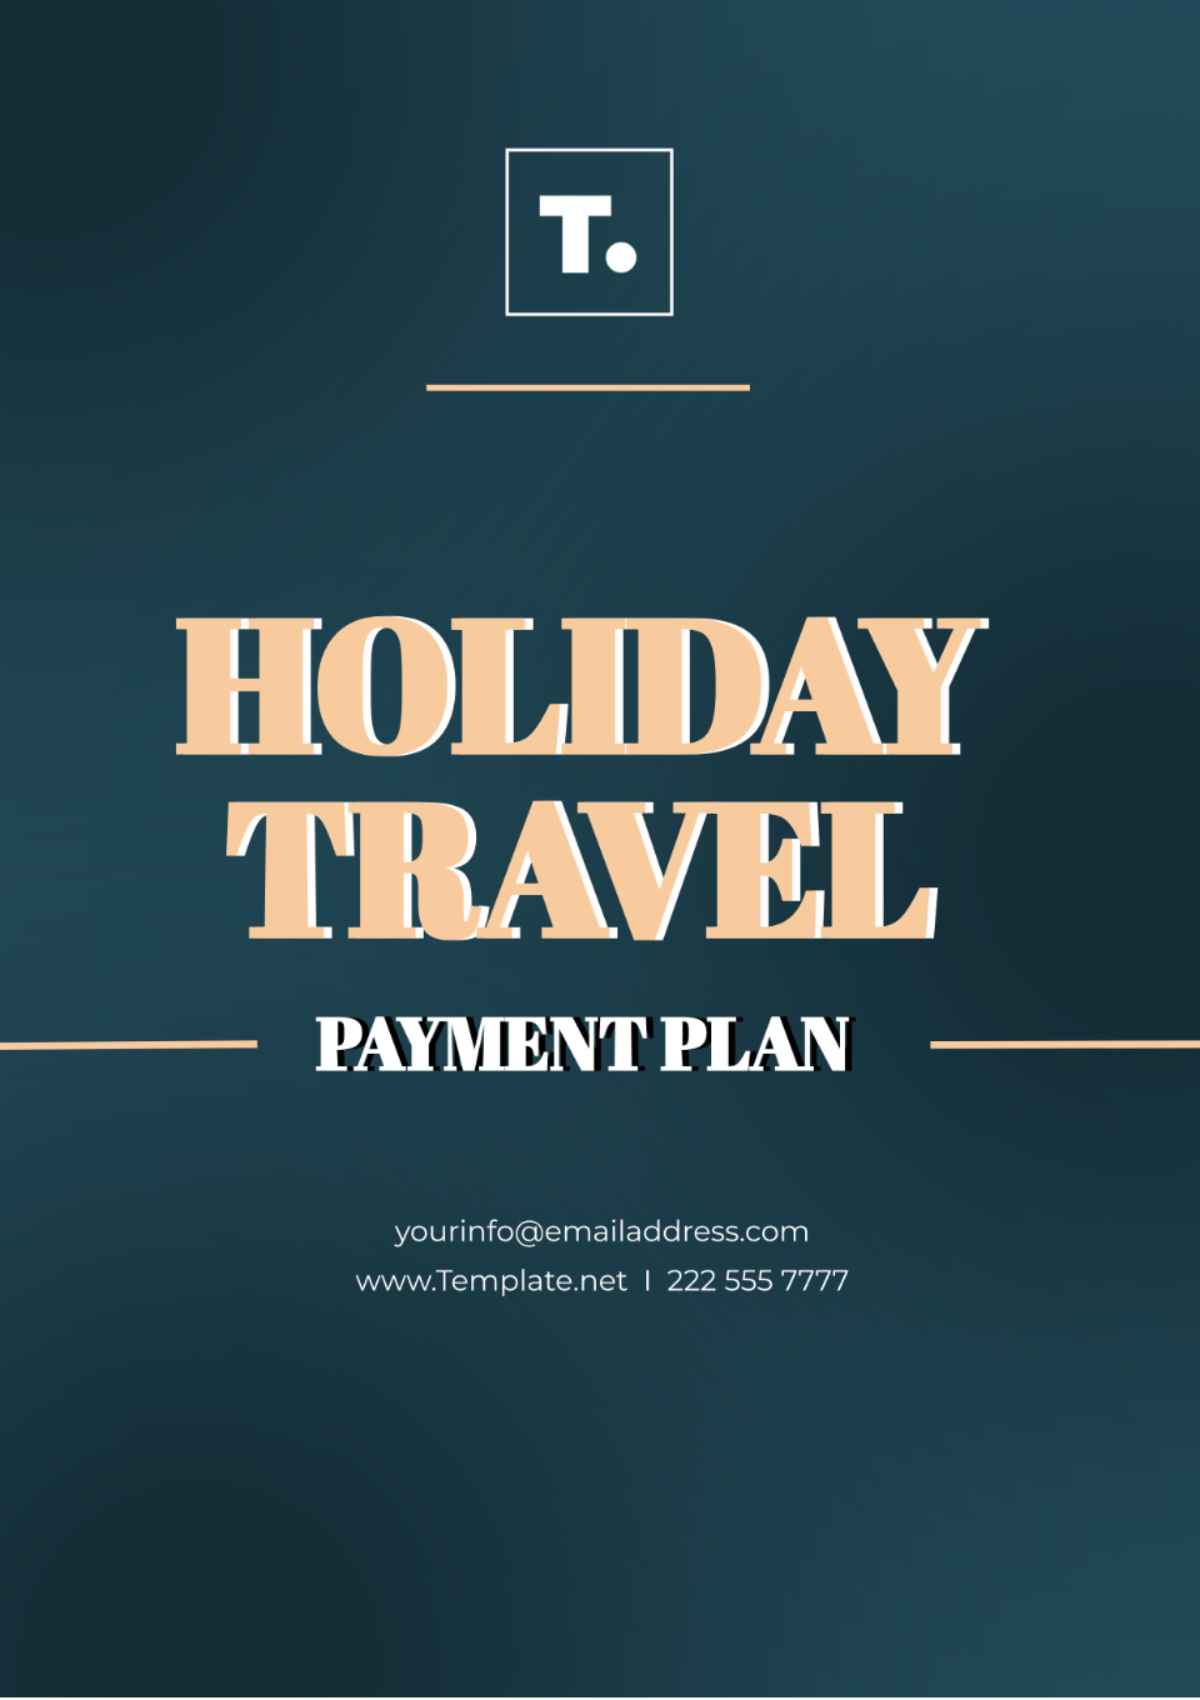 Free Holiday Travel Payment Plan Template